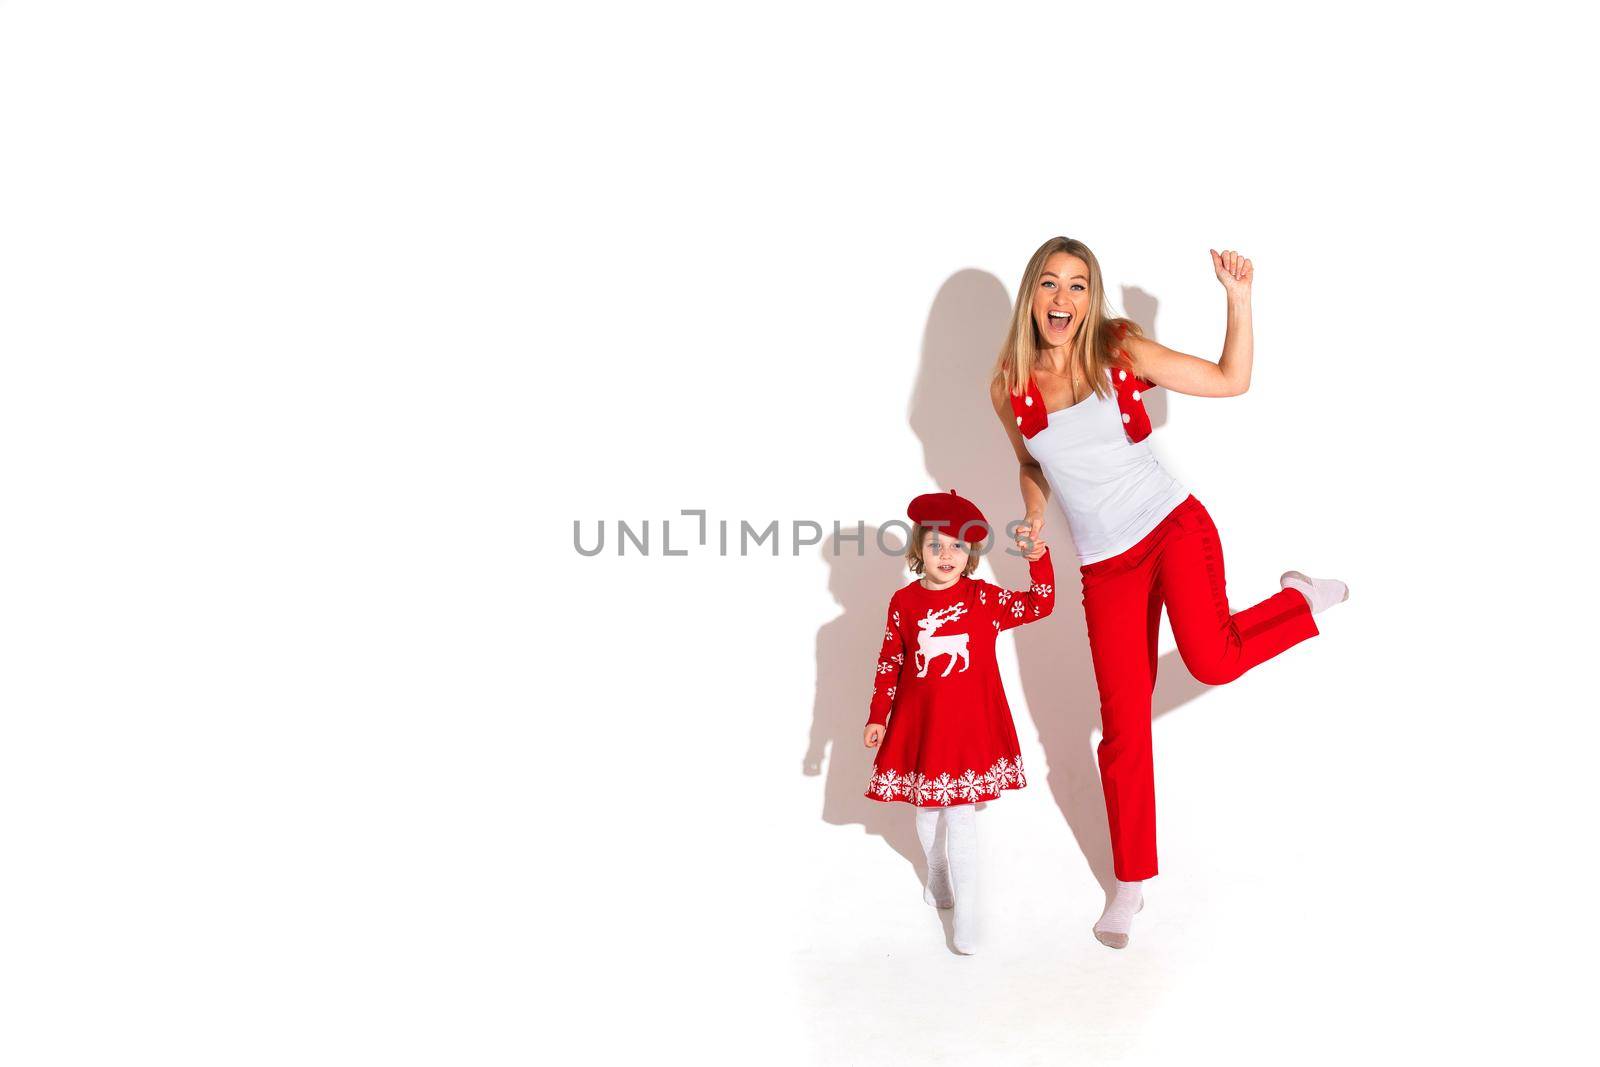 Christmas concept photo of little girl in red dress holding hands with an excited blonde woman while waving at the camera